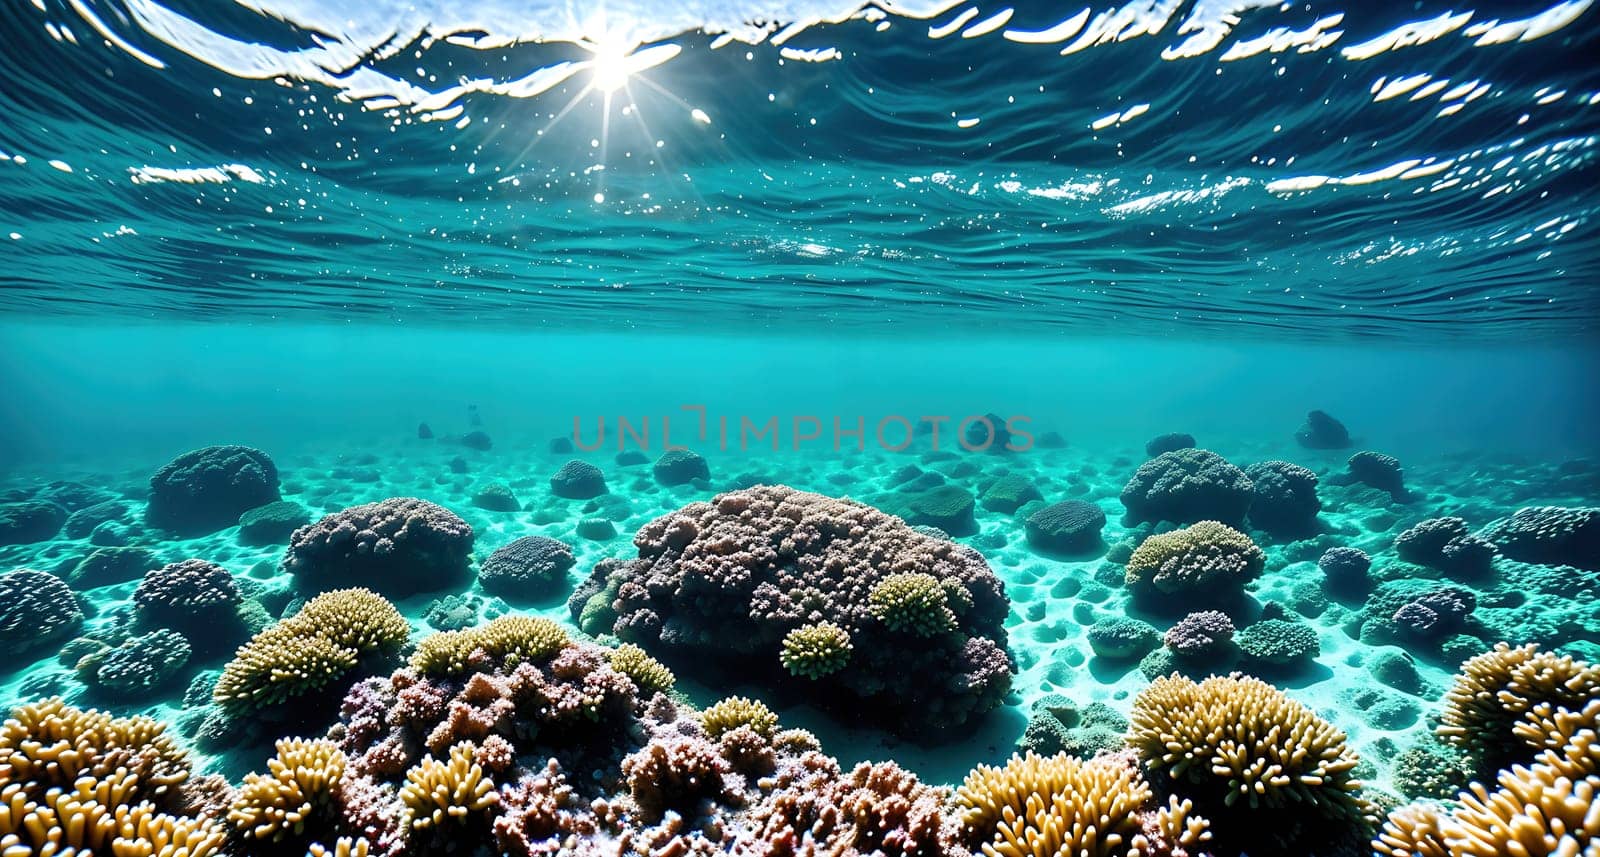 The image shows a coral reef with various types of coral and fish swimming in the water.